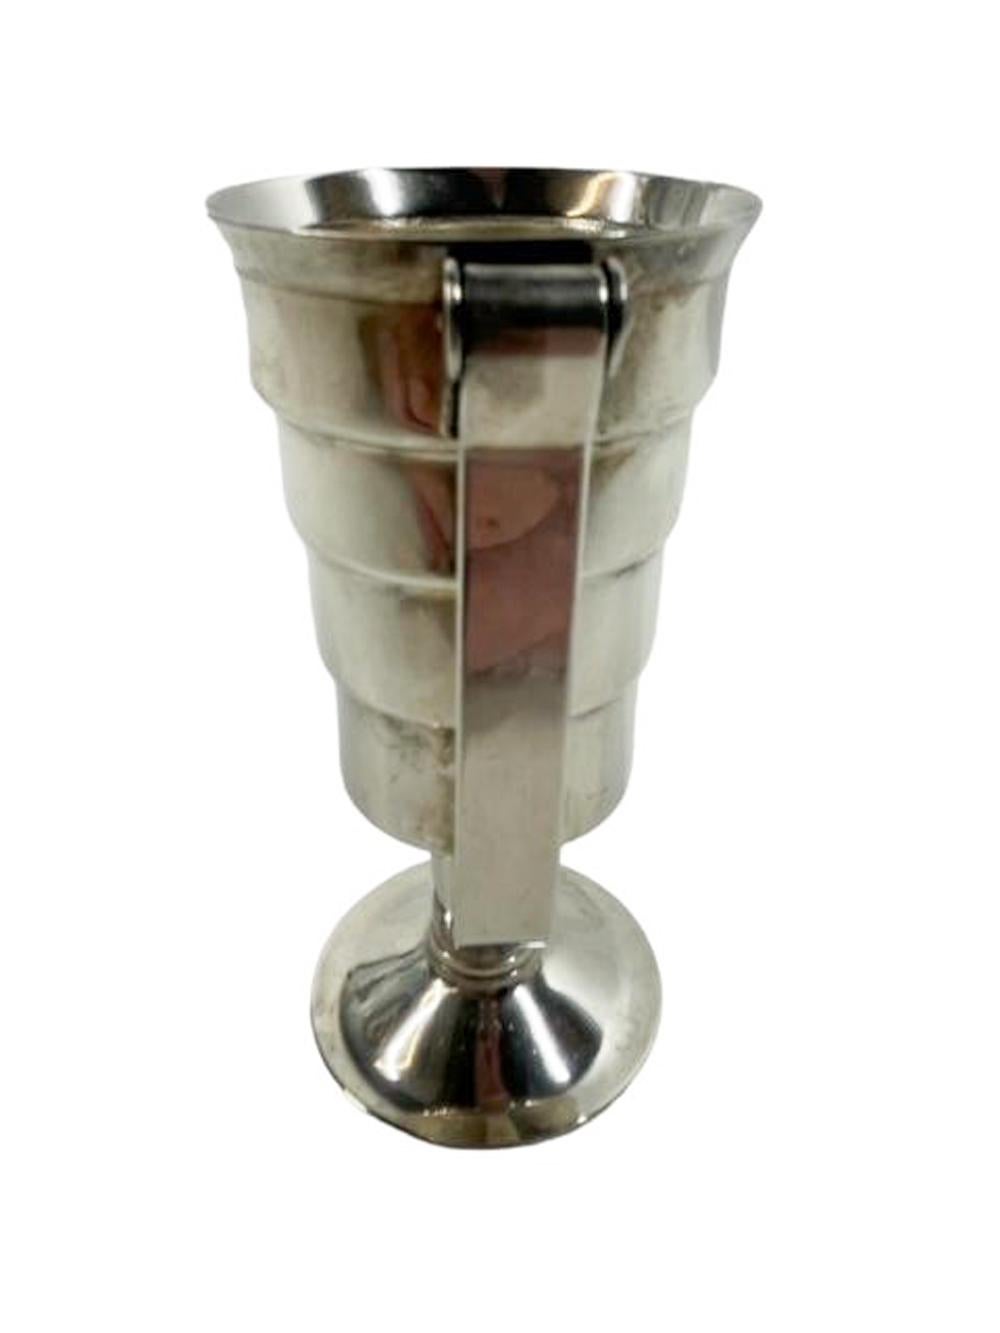 Art Deco silver plate mechanical spirit measure / jigger (squeeze the handle to release the contents). Stepped cylindrical cup on footed stemmed base and calibrated for 1/2oz to 2oz. When filled to desired level, hold over the glass or shaker and